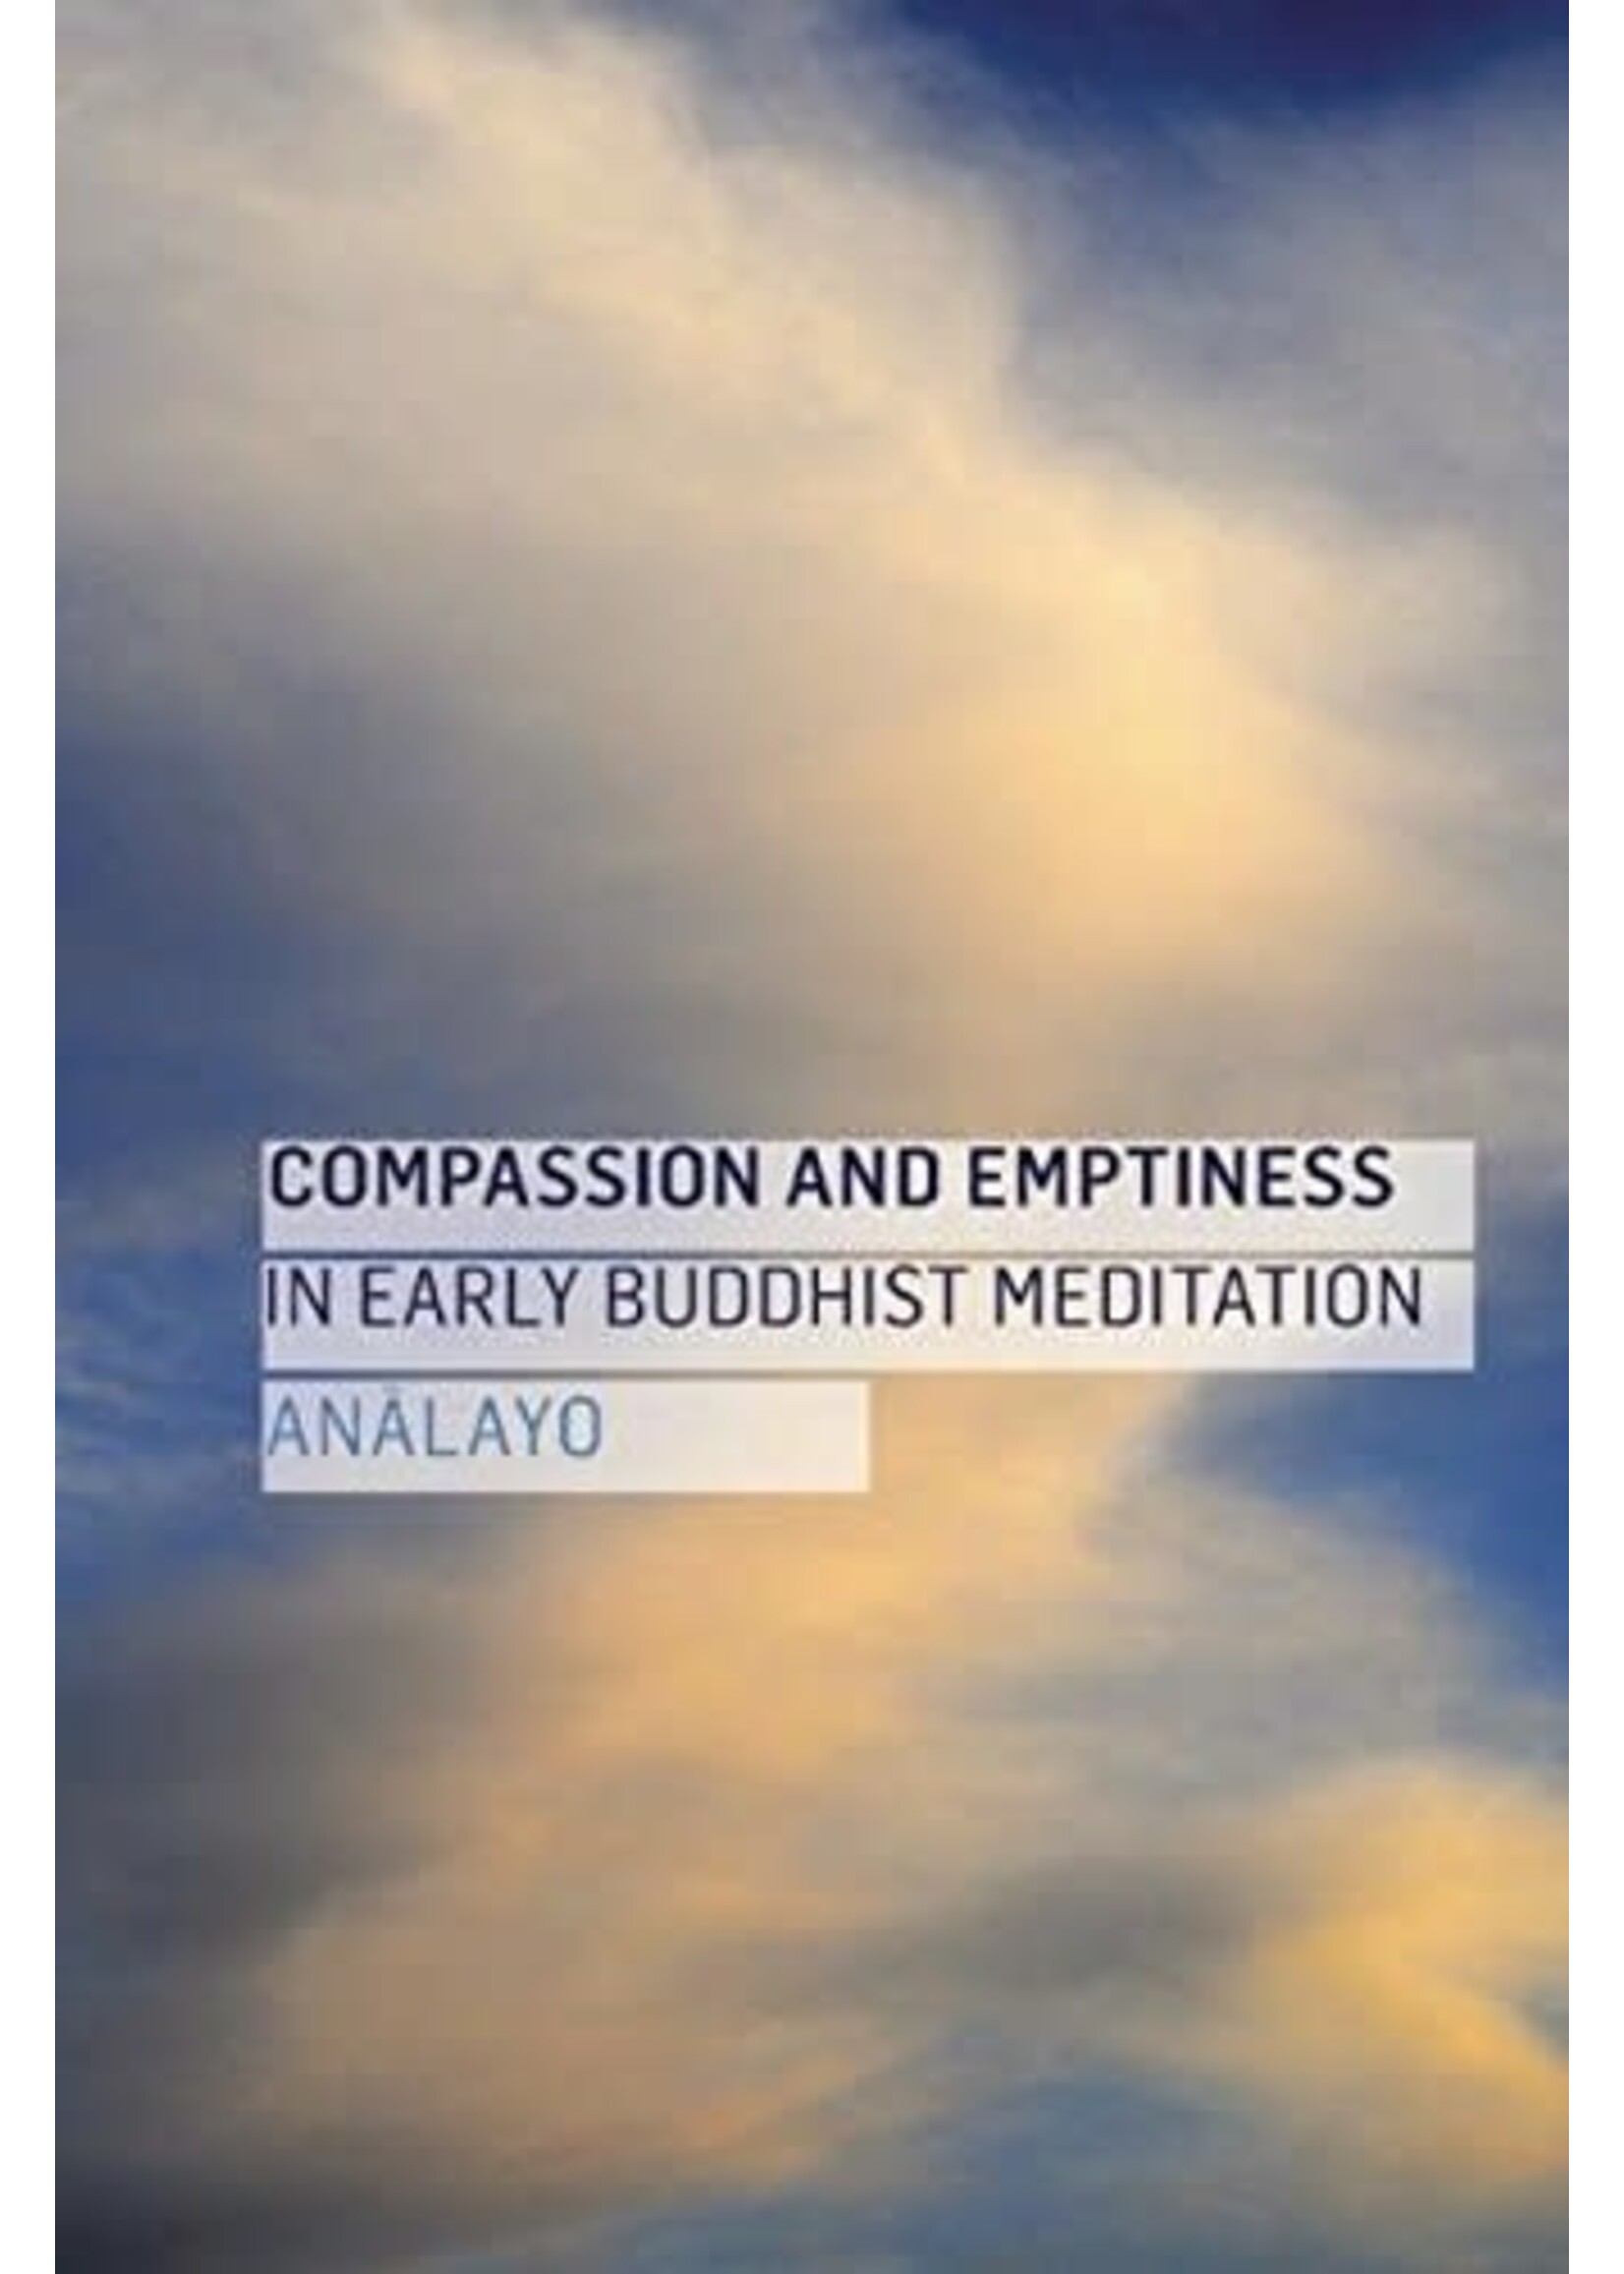 Compassion and Emptiness In Early Buddhist Meditiation by Bhikkhu Analayo